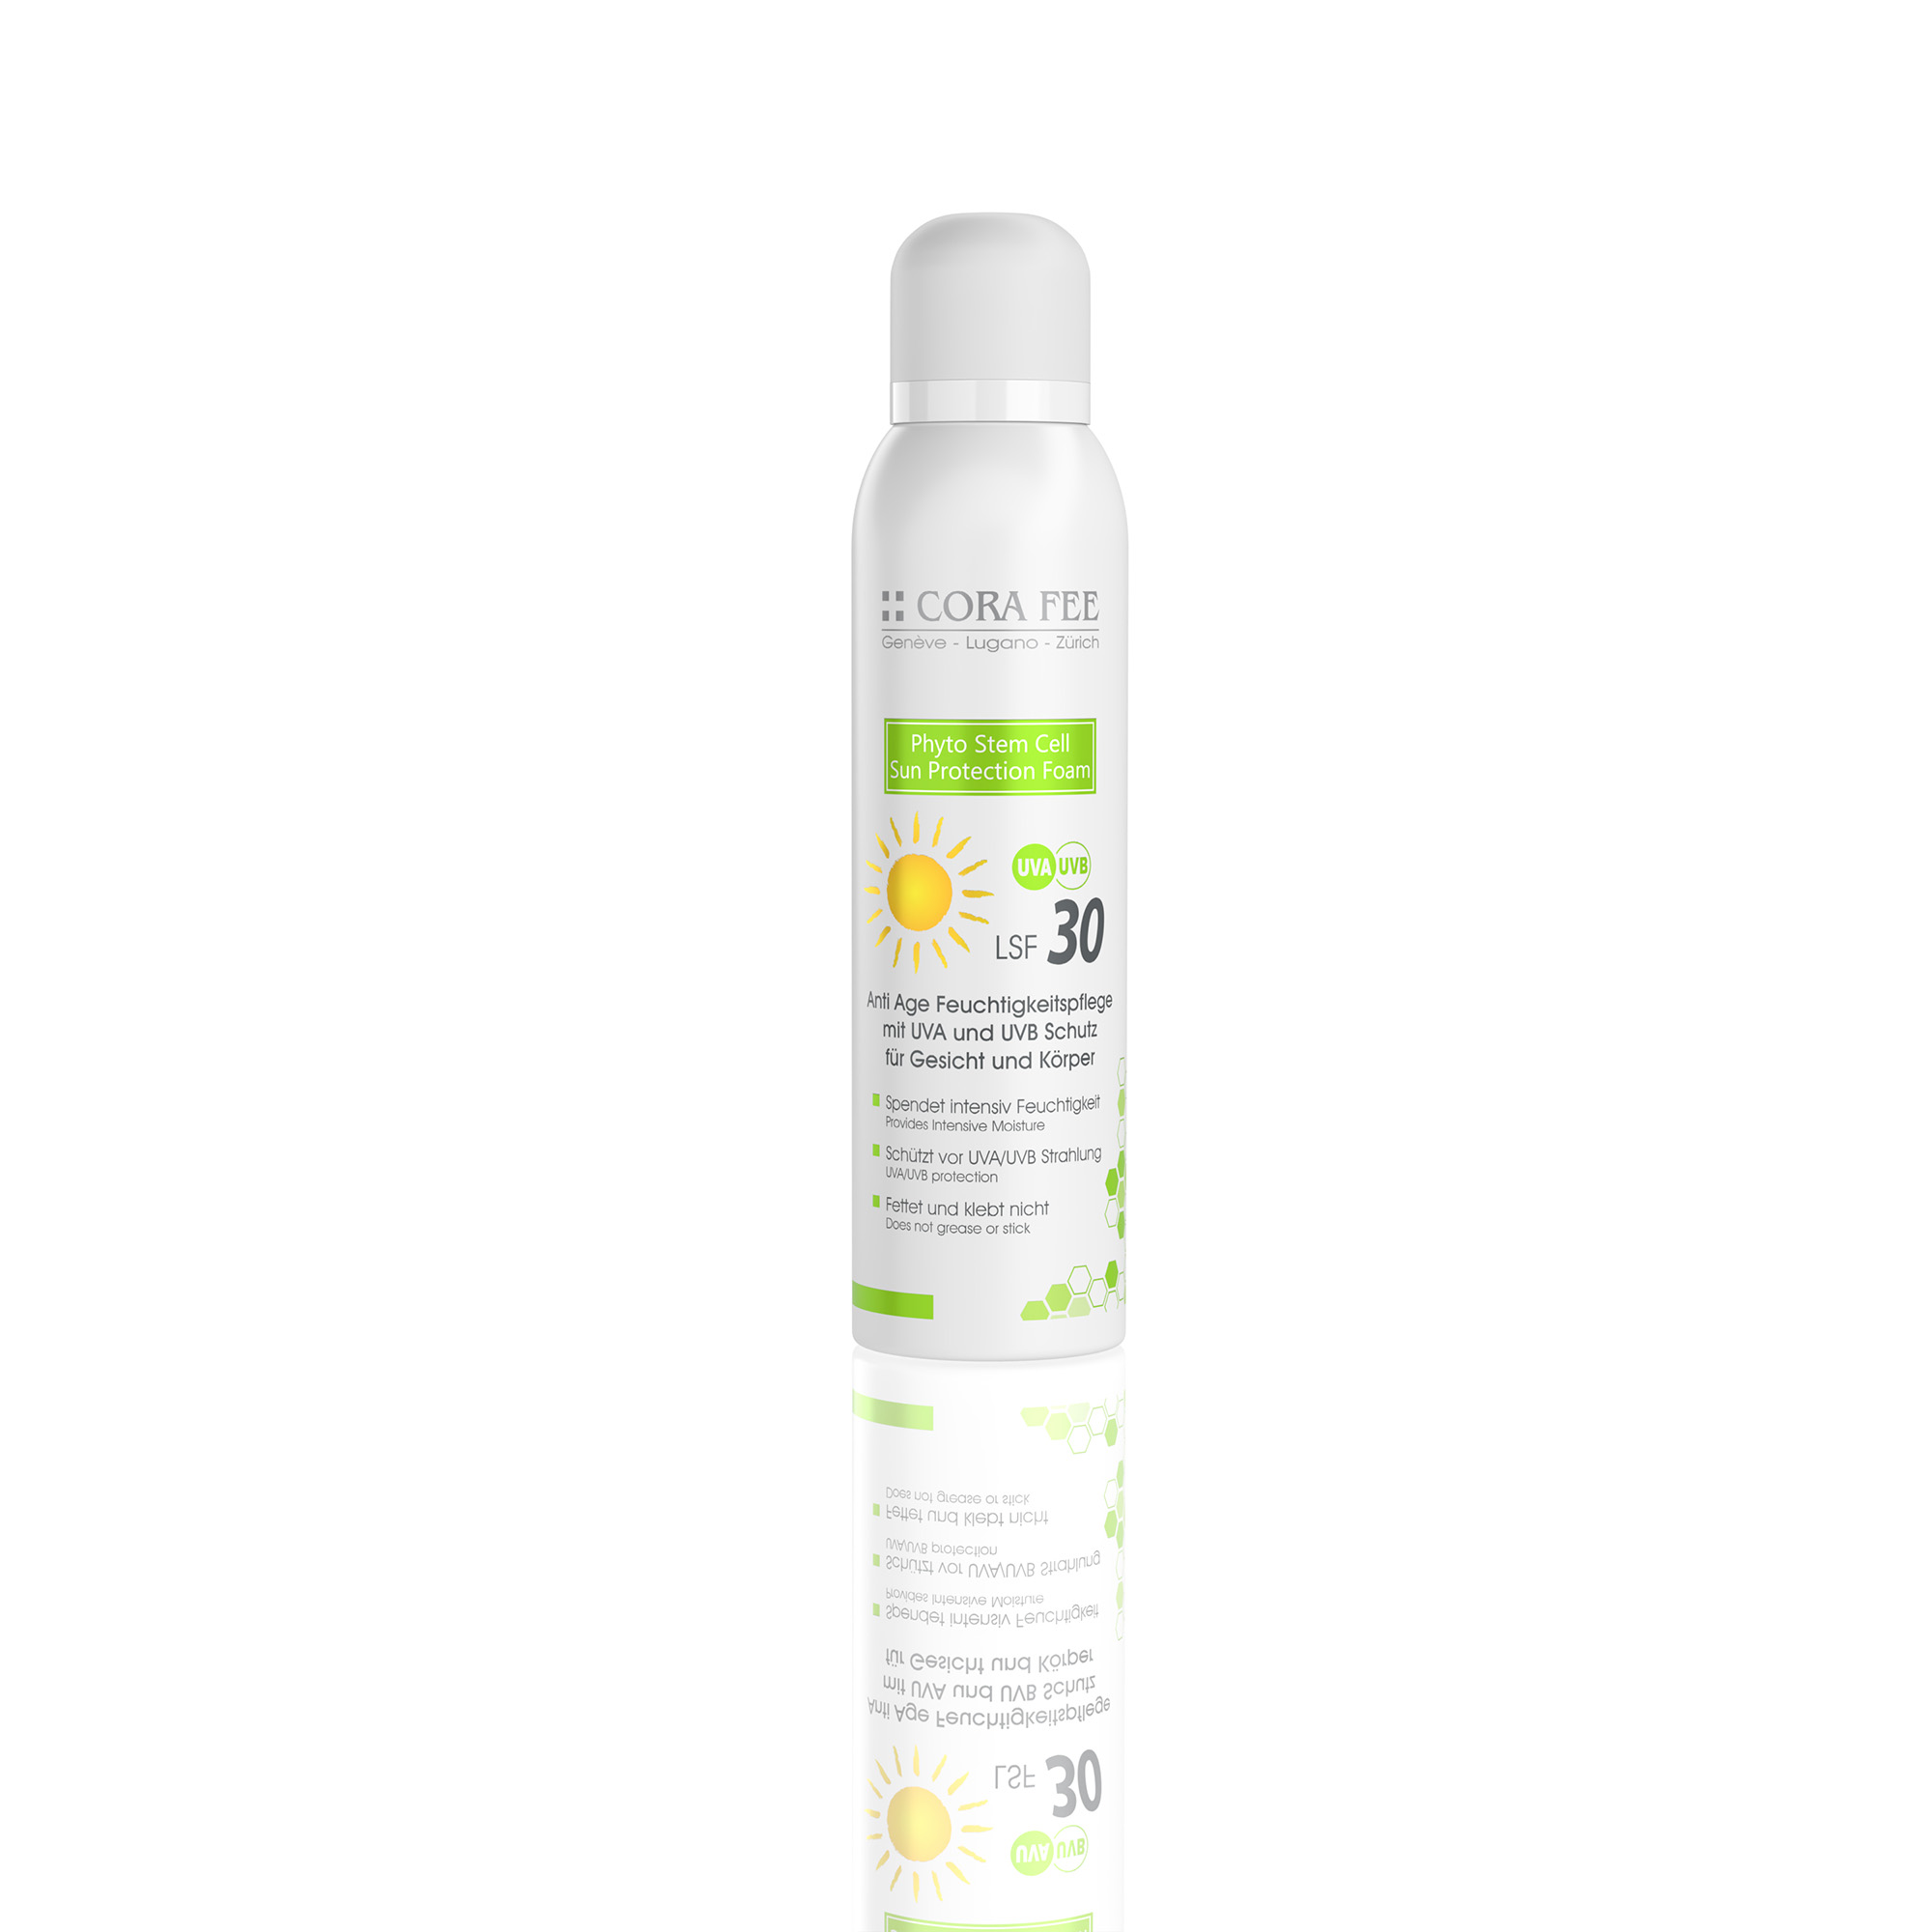 Cora Fee Phyto Stem Cell, sun protection foam for face and body, SPF 30, 150ml